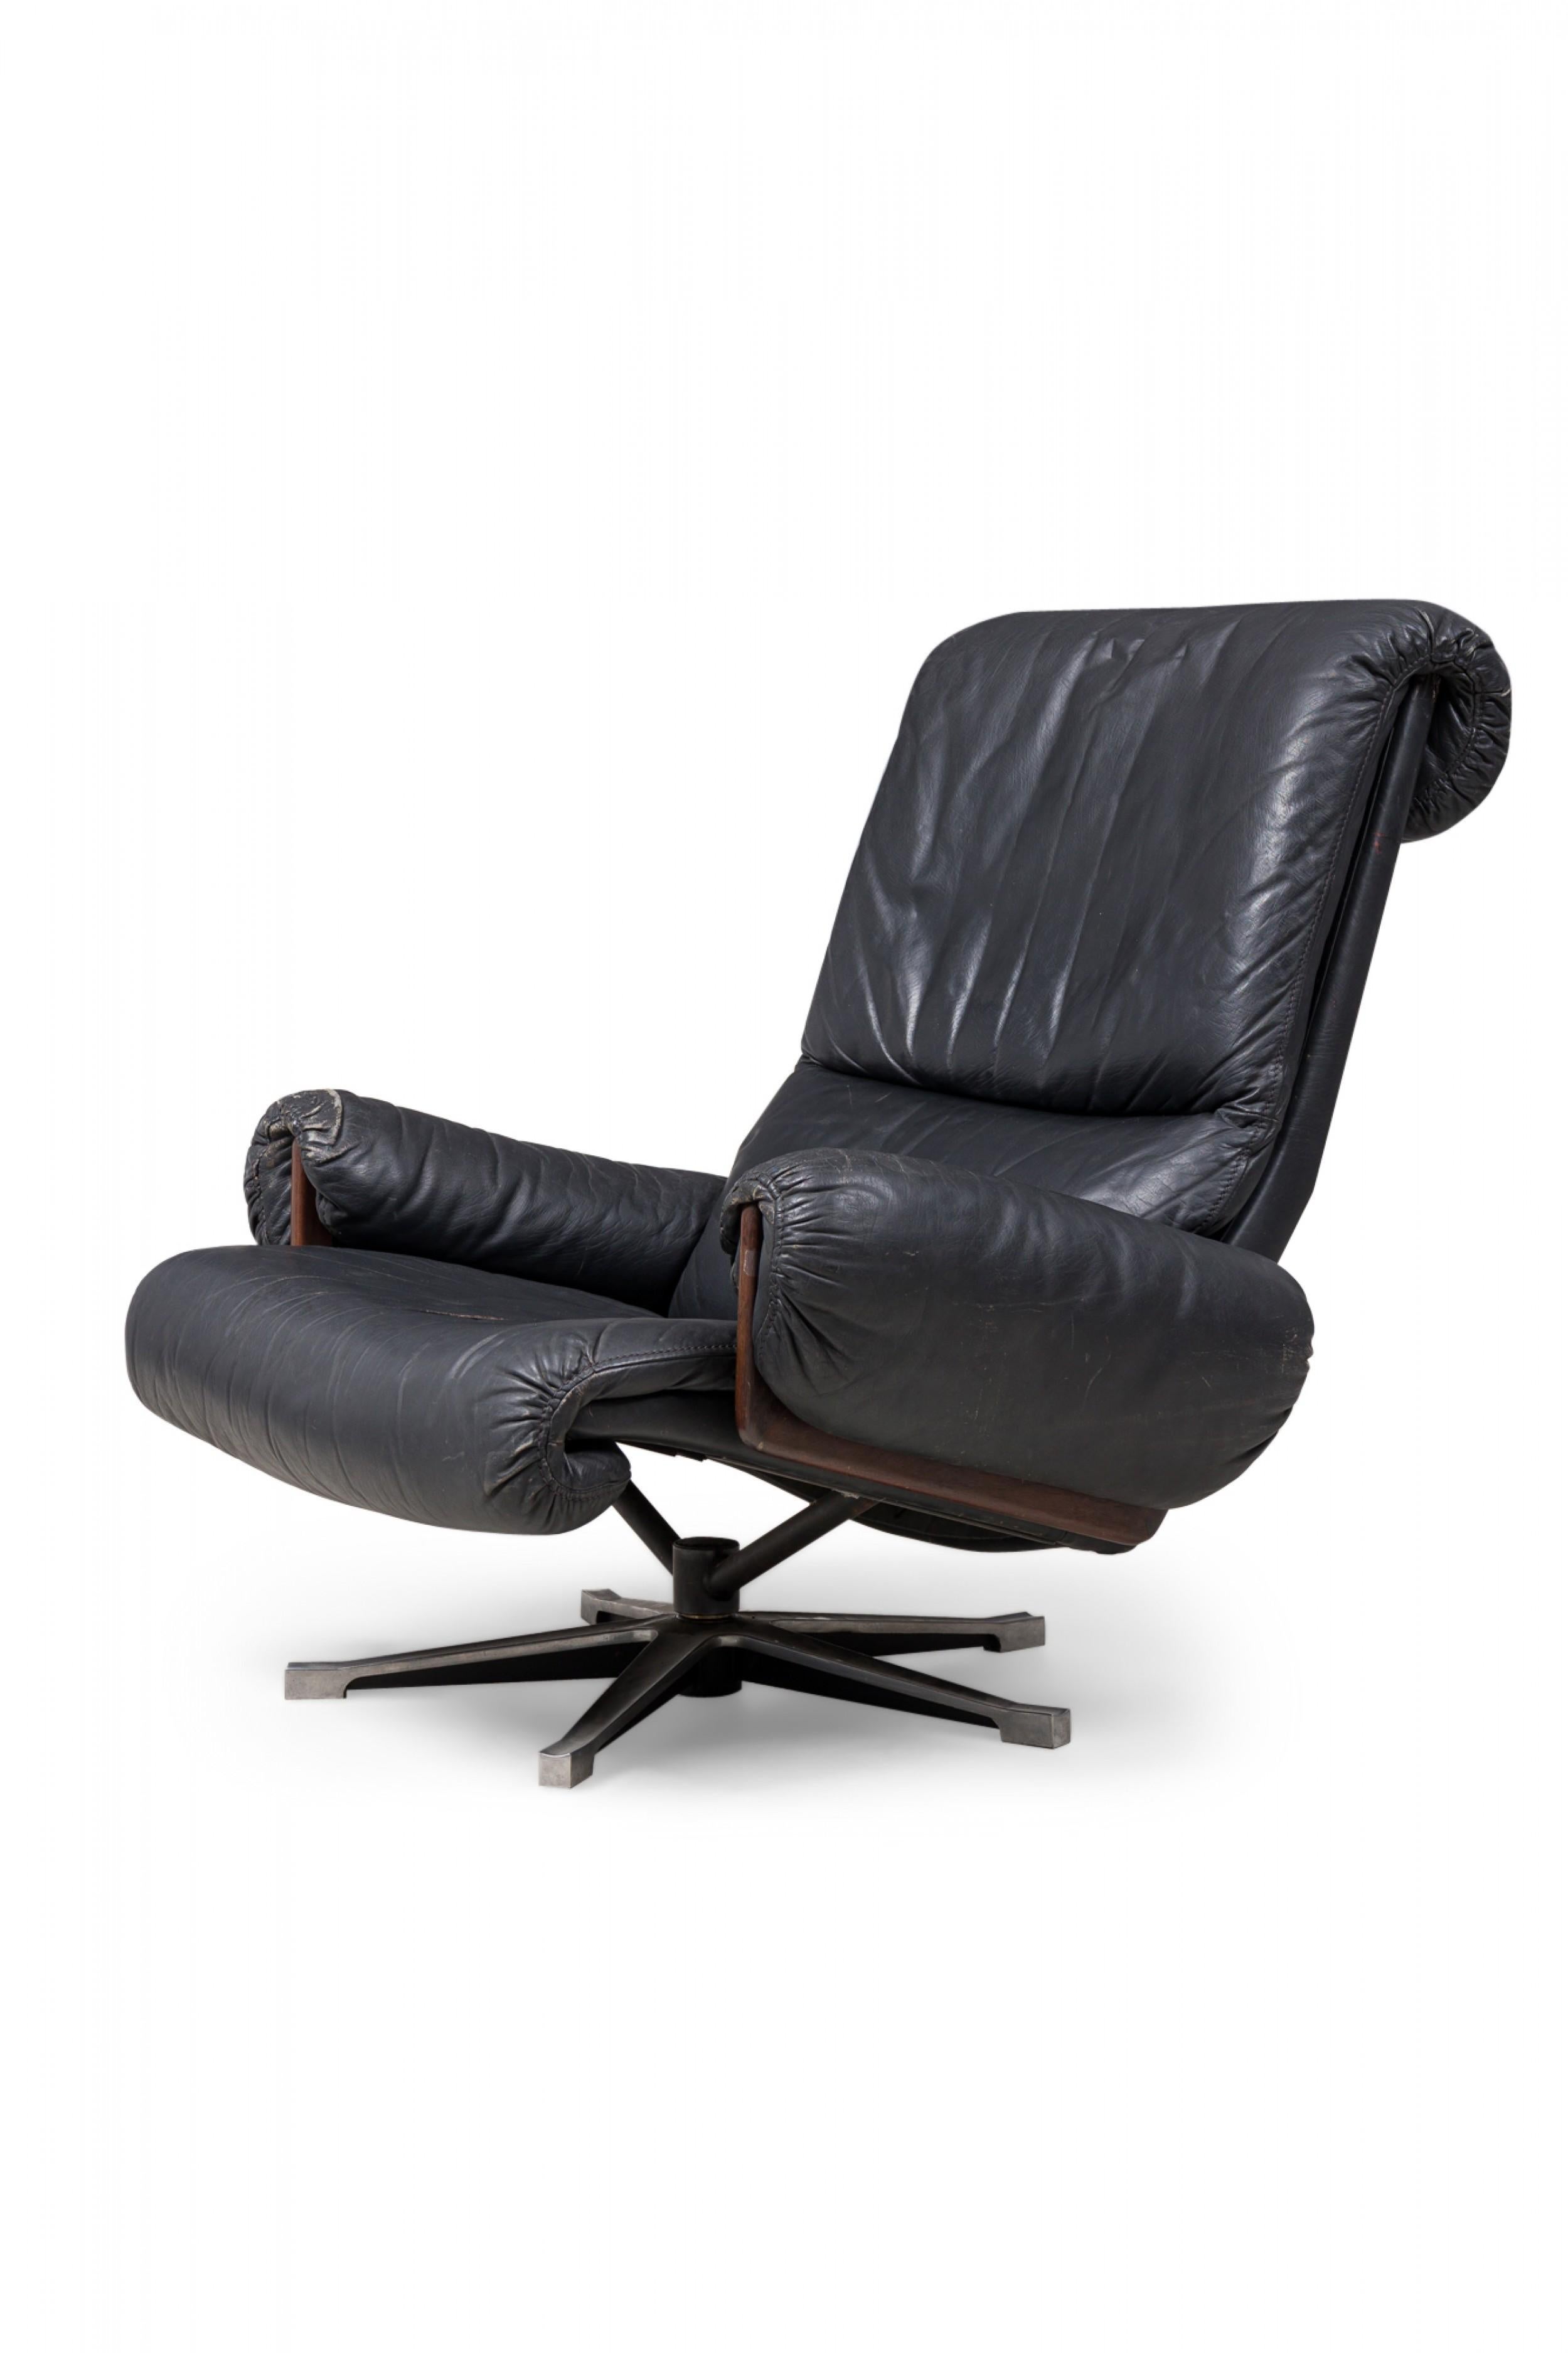 midcentury Swiss (1970s) metal swivel chair with incurved back, seat and arms upholstered in black leather, supported by a star shaped, swivel base with small circular adjustable feet. (Matching ottoman: REG5054) (De Sede).